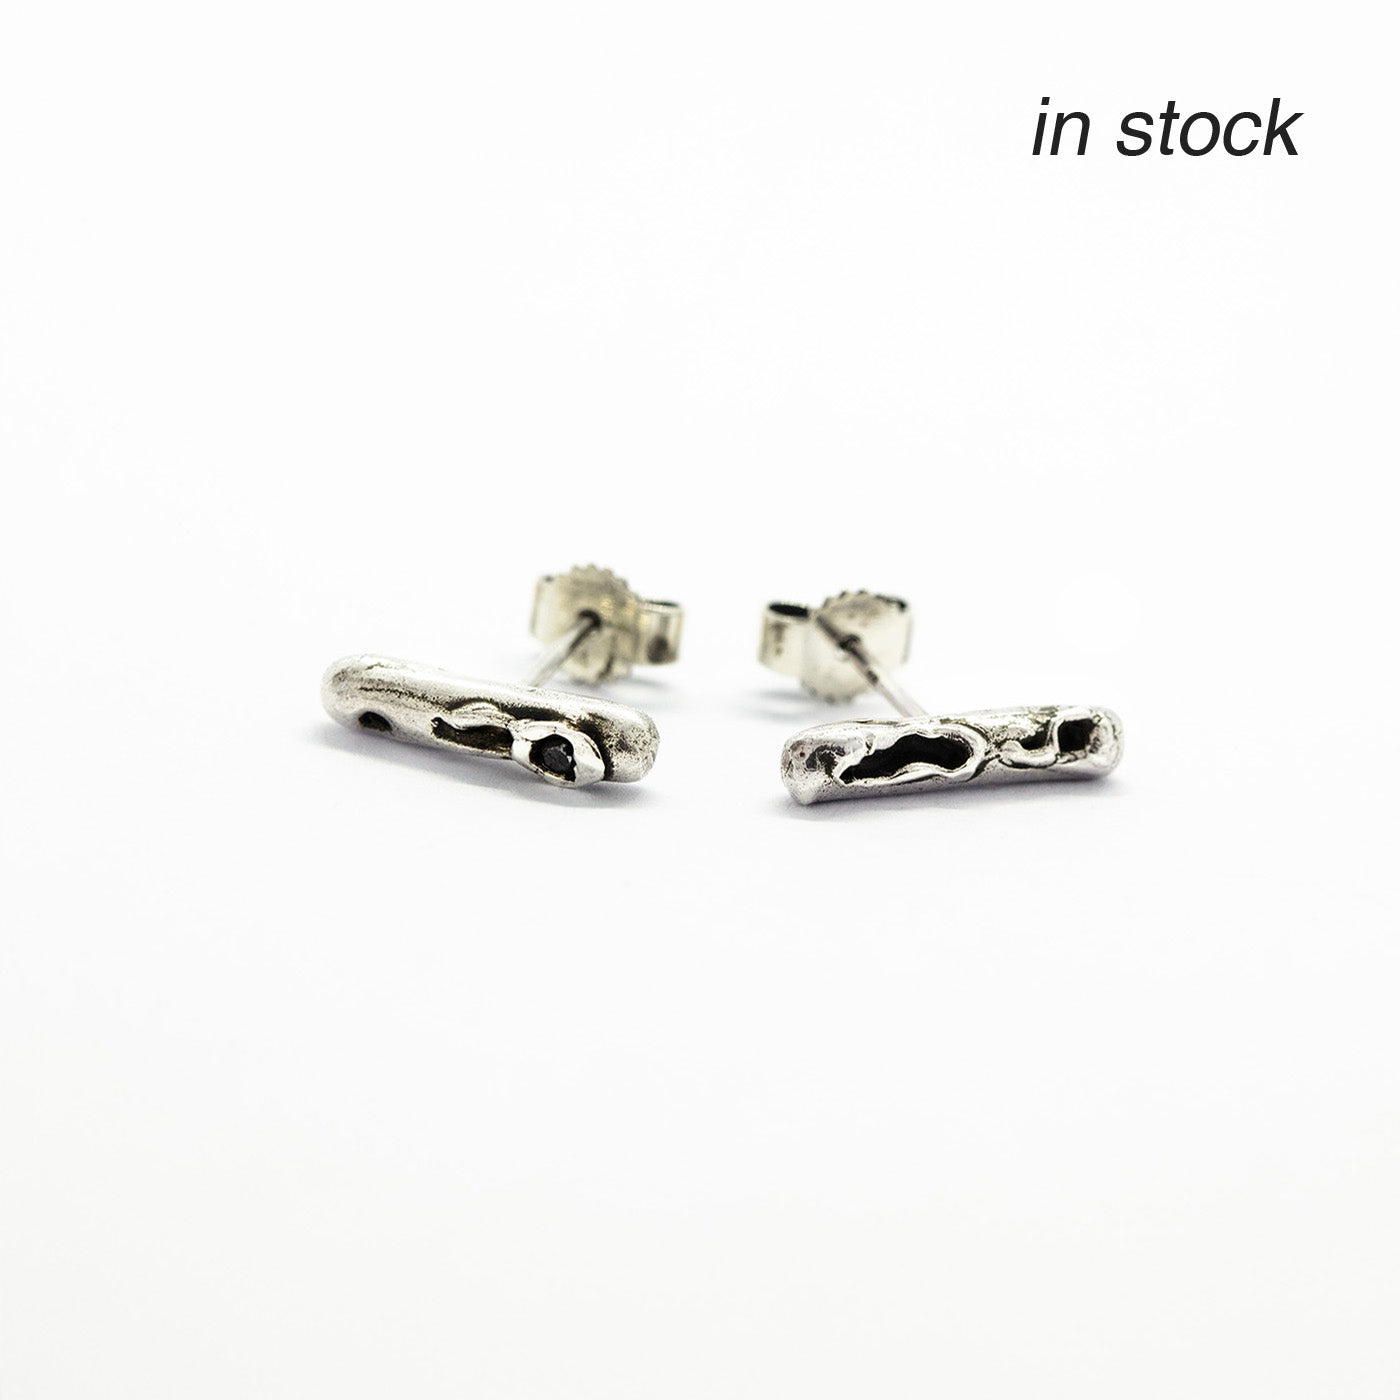 earrings cenote bar silver black diamond product view innan jewellery independent atelier berlin in stock